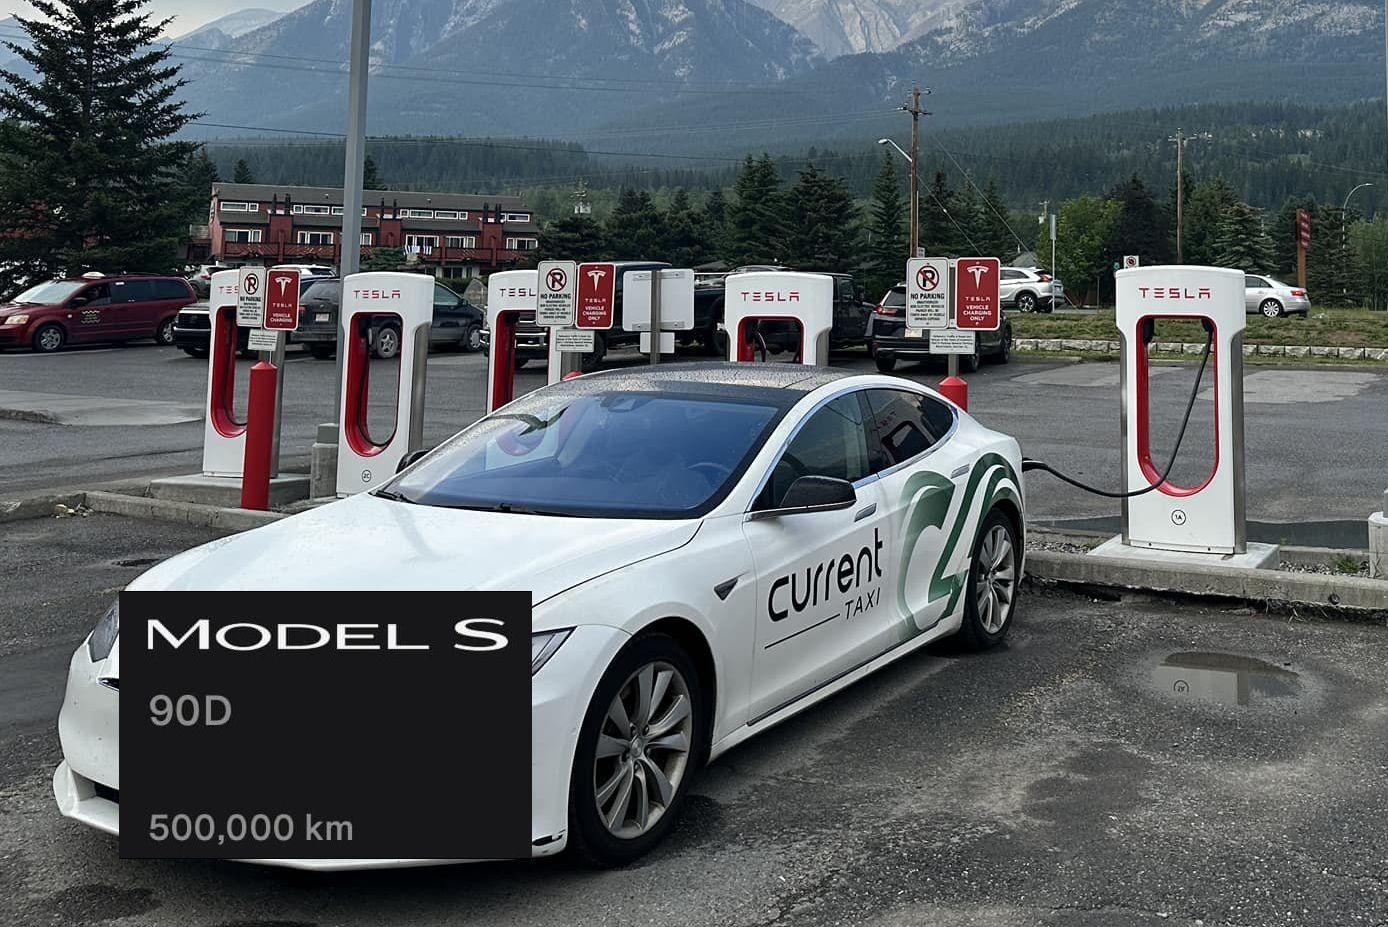 2016-tesla-model-s-used-as-a-taxi-has-only-12-battery-degradation-after-310k-miles-221769_1